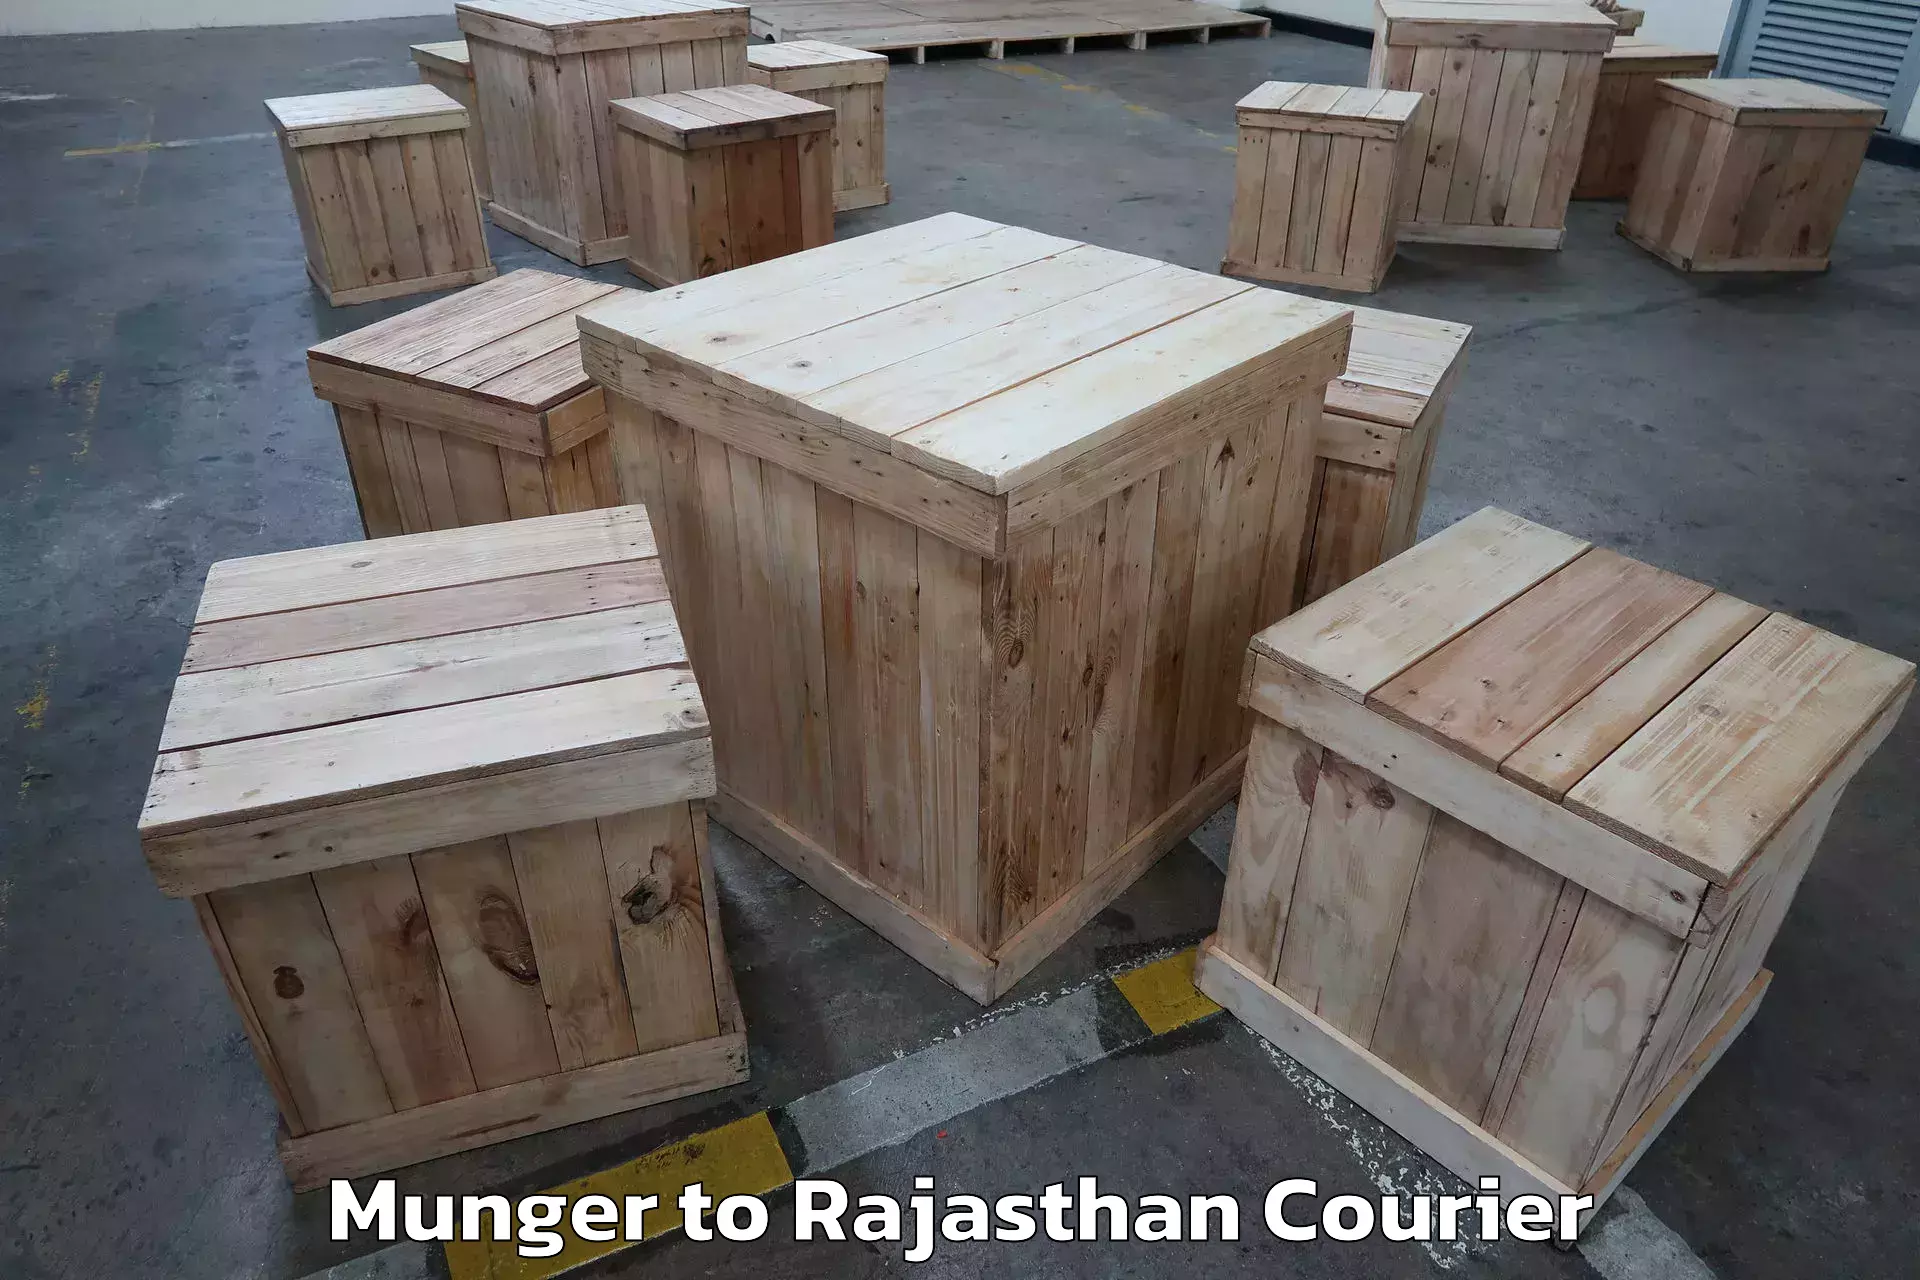 Full-service relocation in Munger to Rajasthan